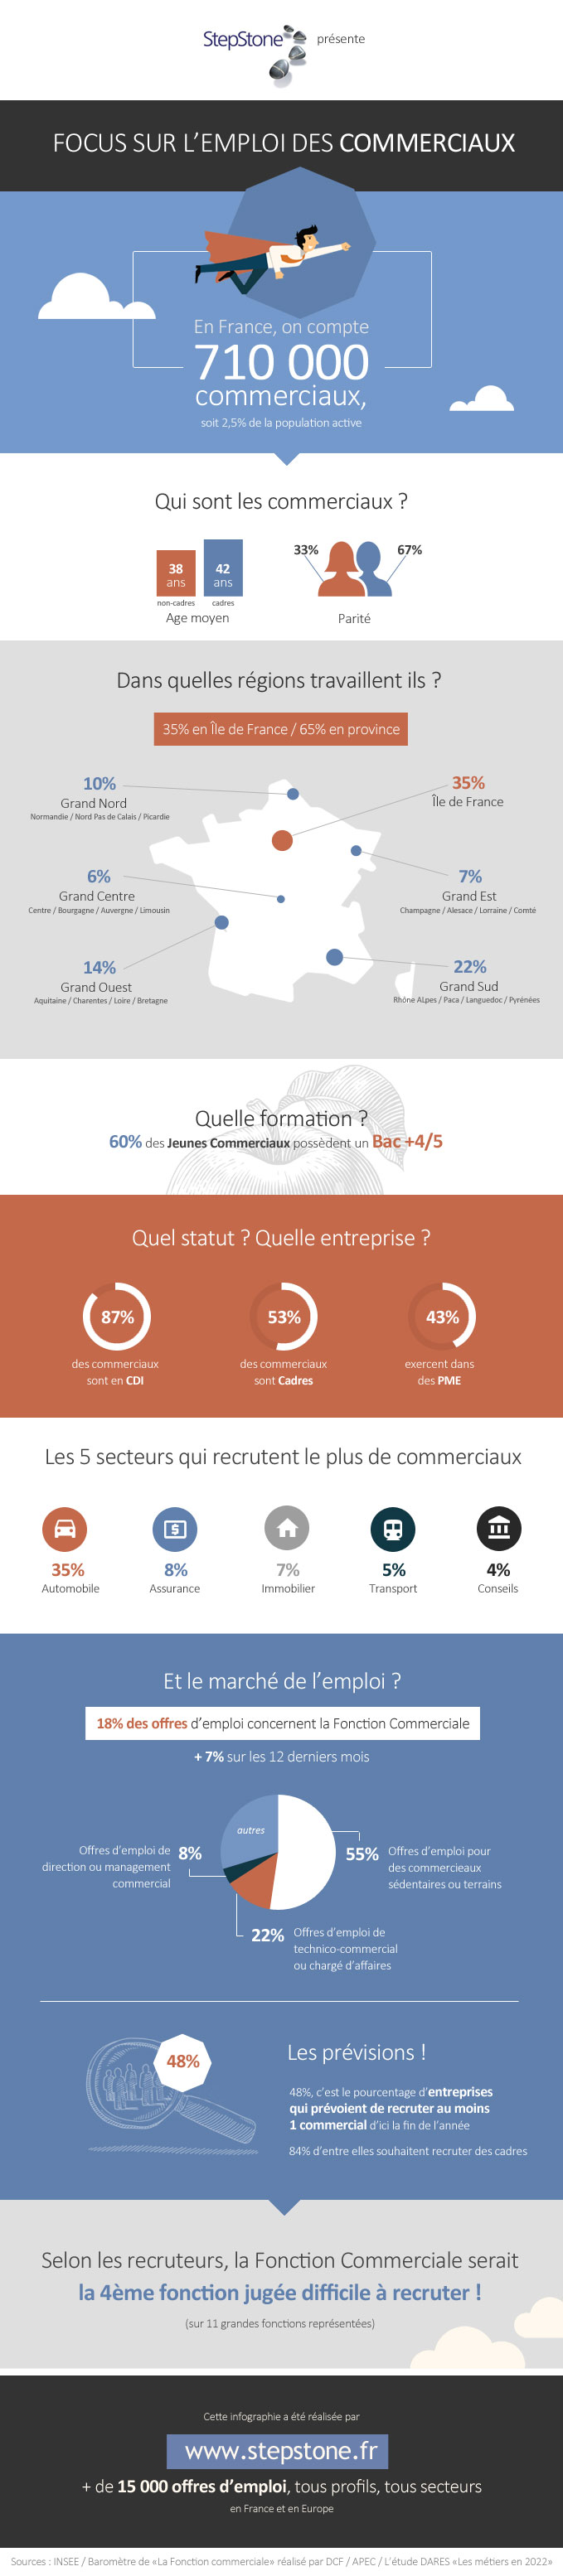 infographie_fonctions_commerciale